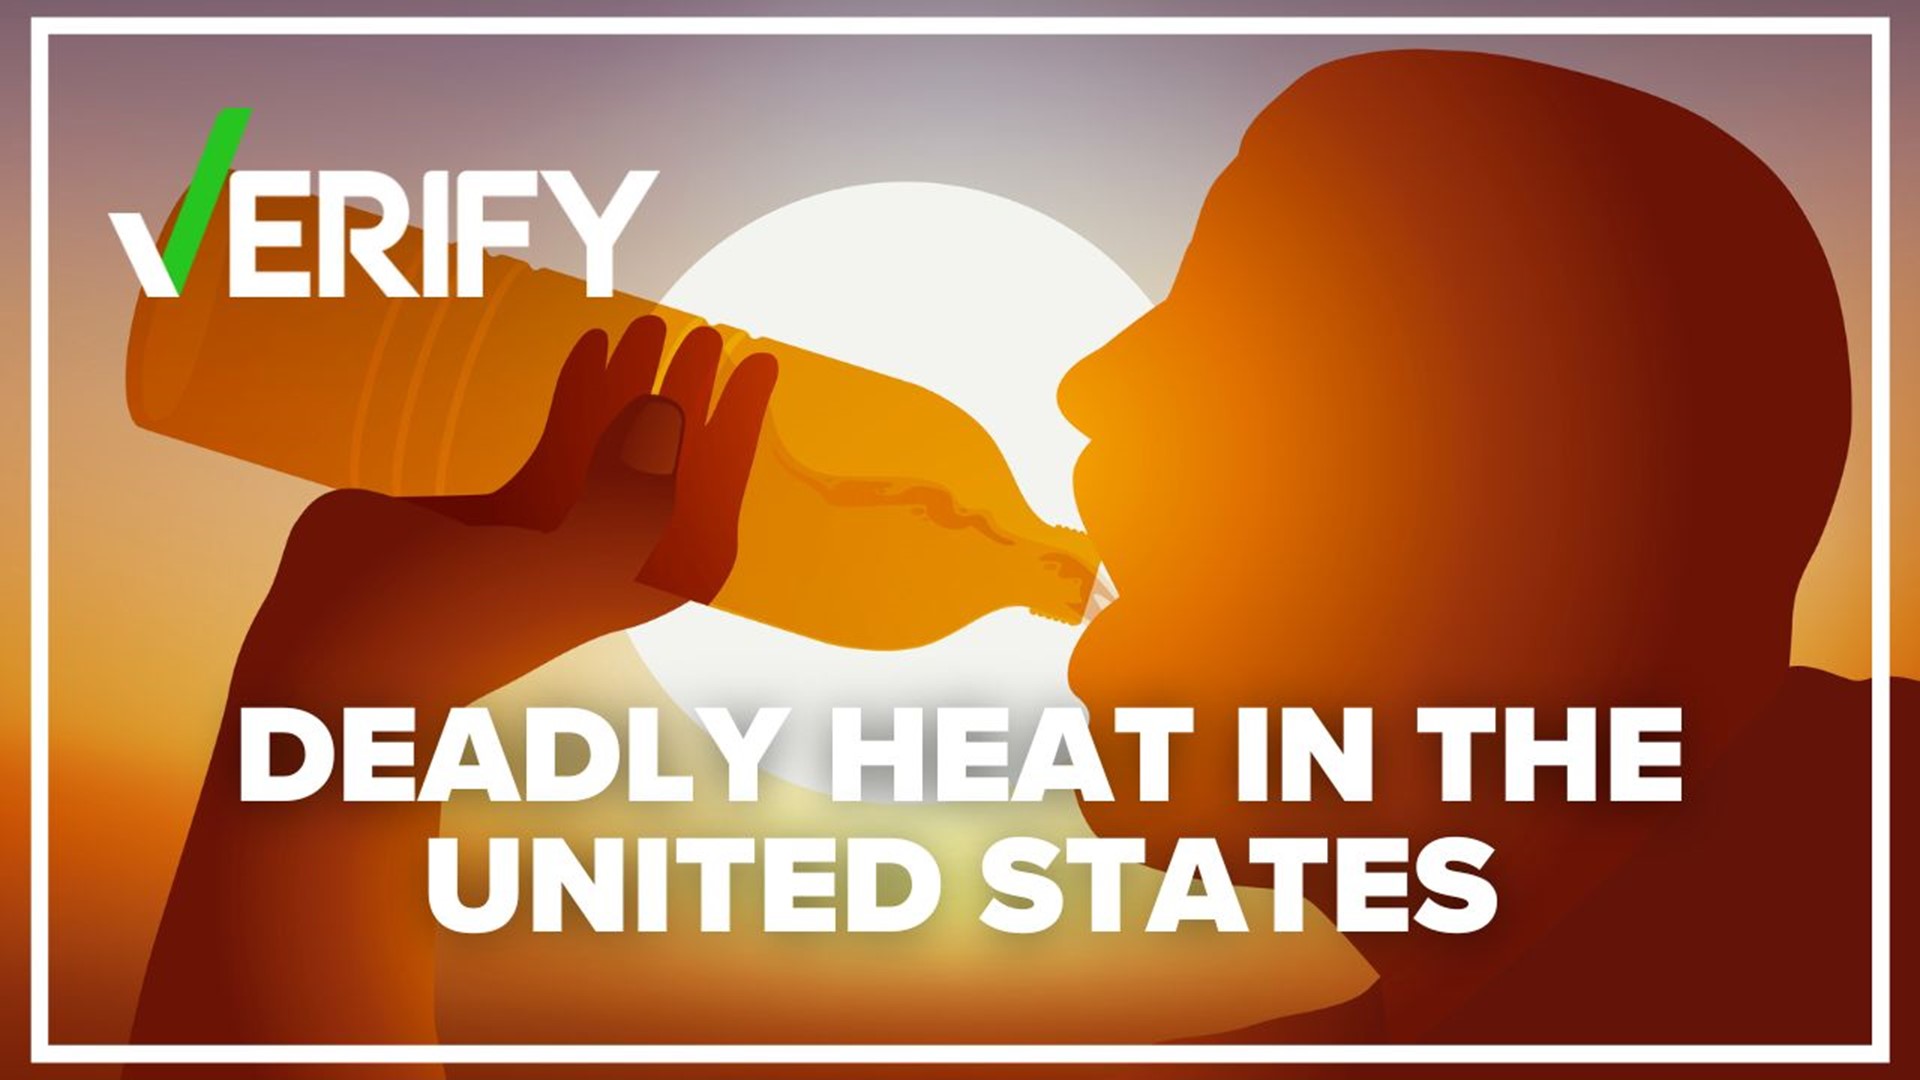 The CDC said the people most at risk for heat-related illness or death are older adults, young children, and people with chronic disease and mental illness.